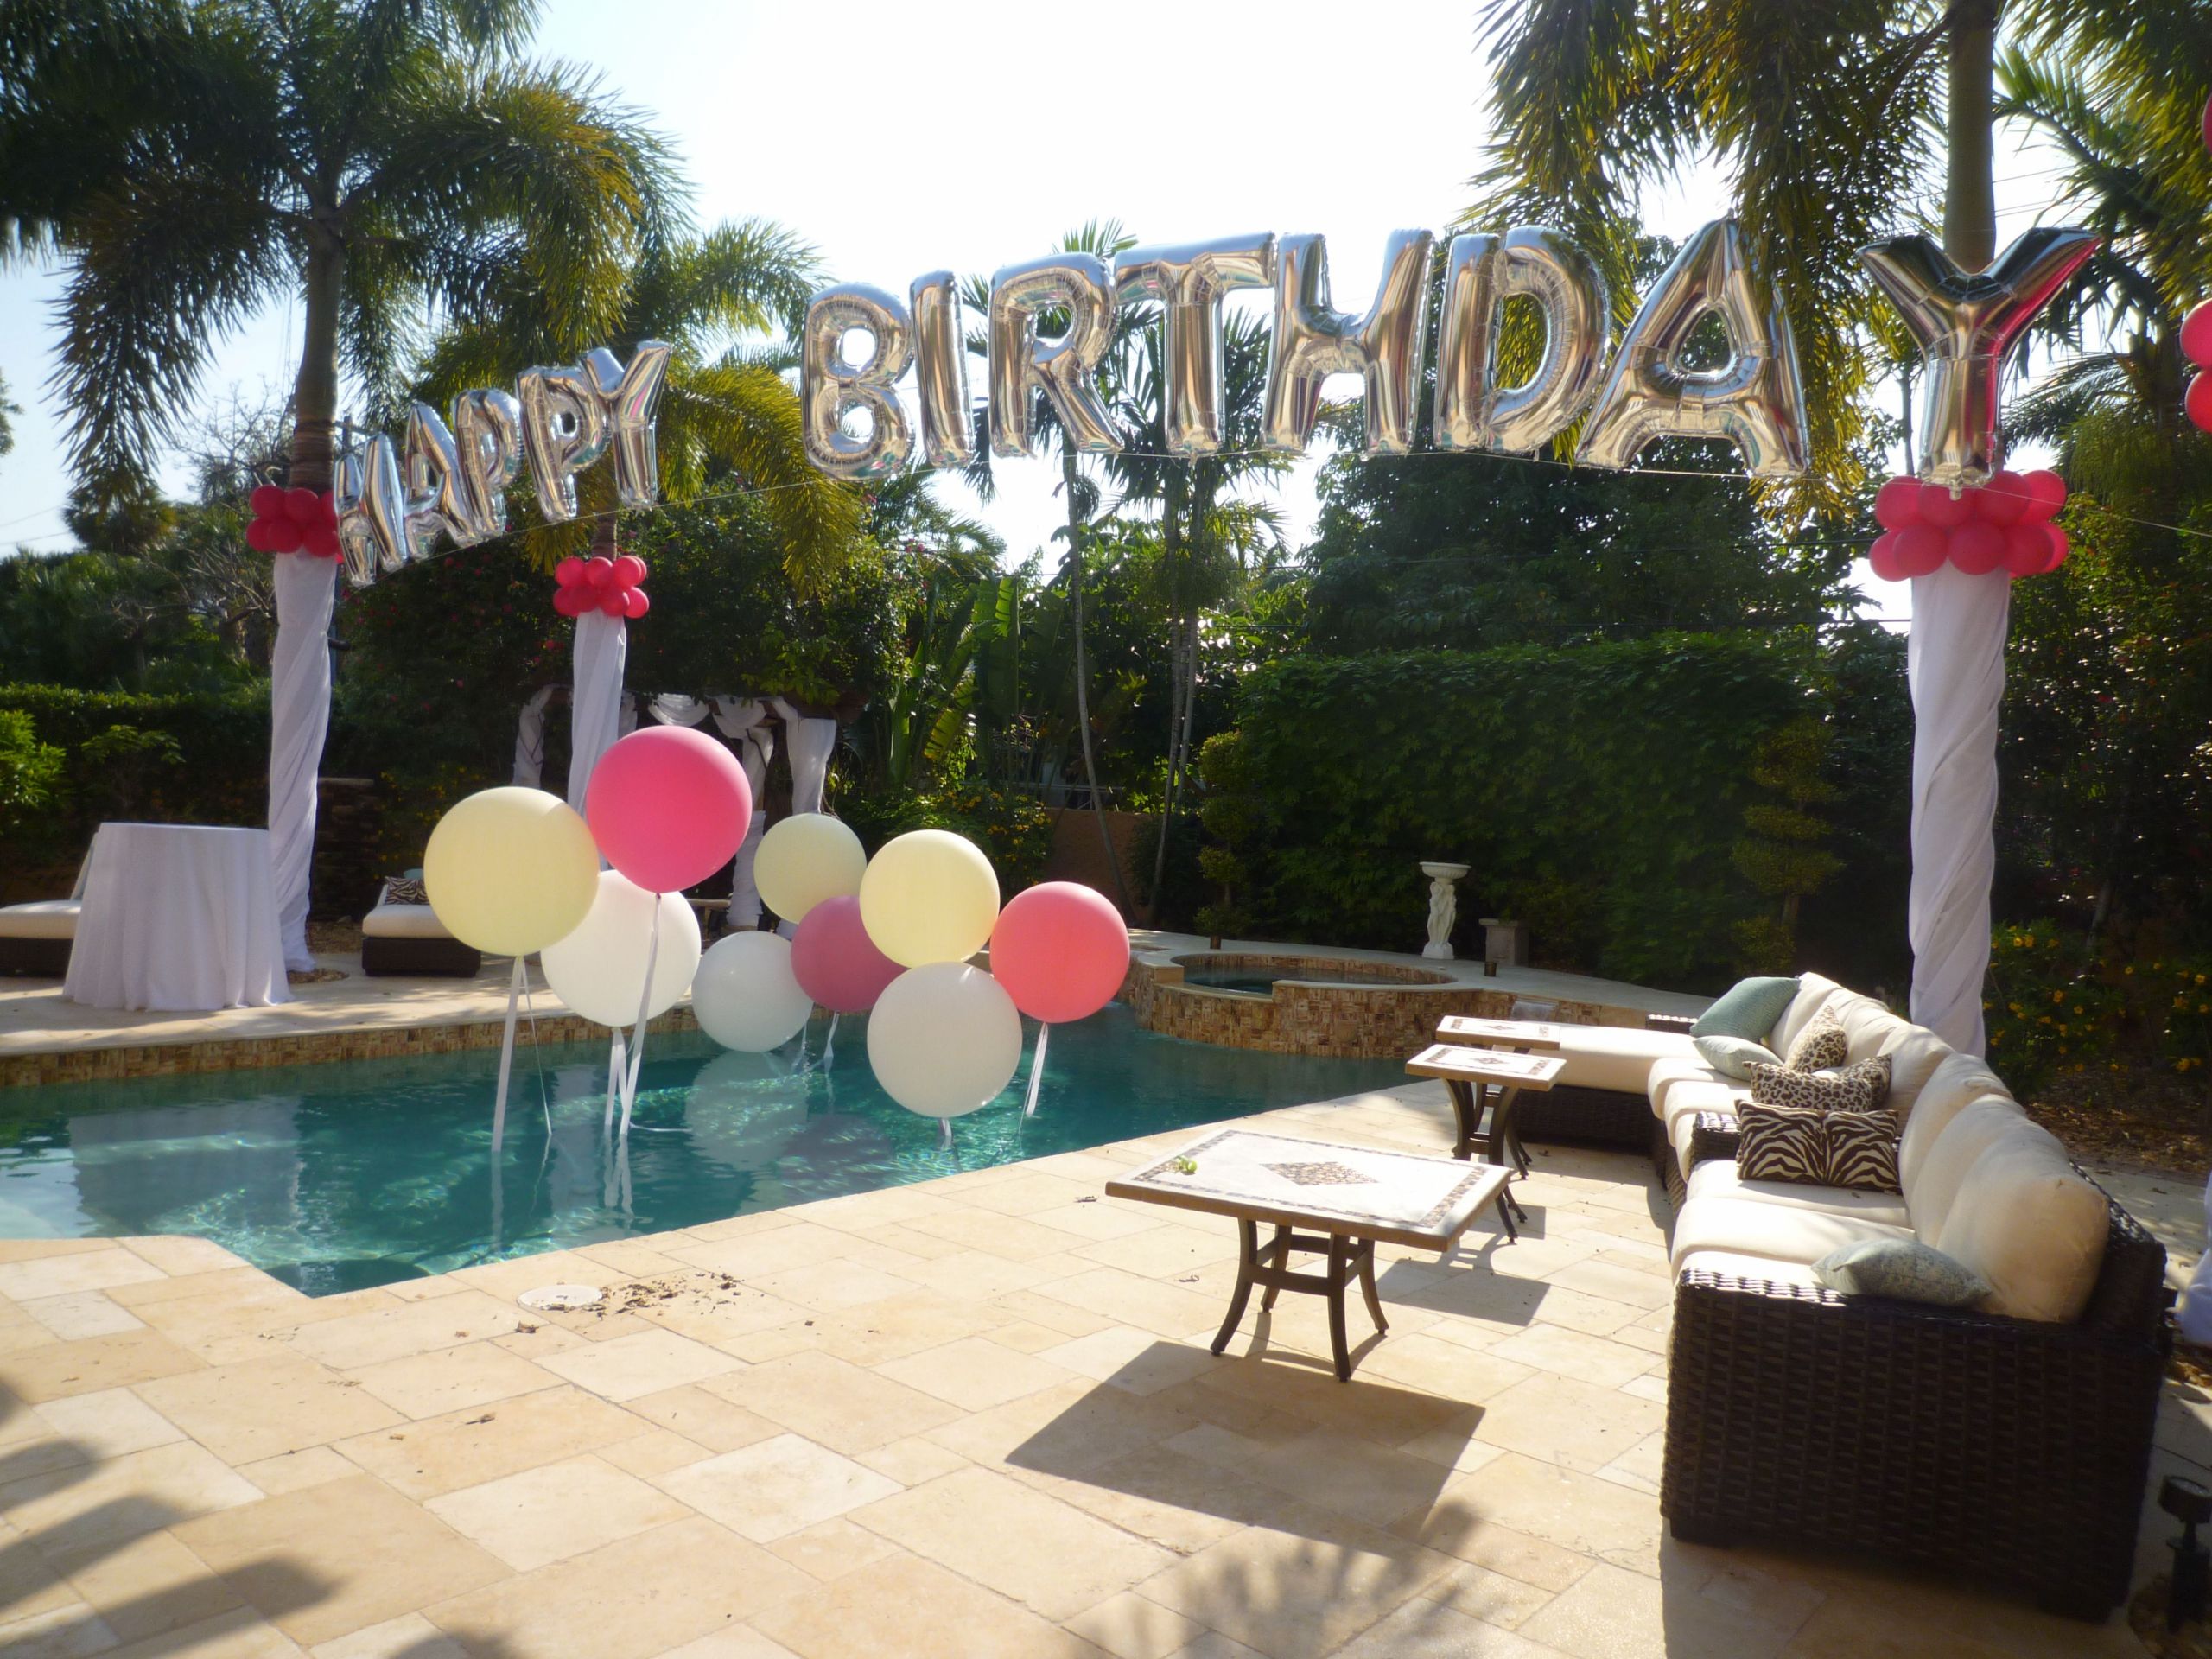 Backyard 18Th Birthday Party Ideas
 Birthday balloon arch over a swimming pool Backyard party